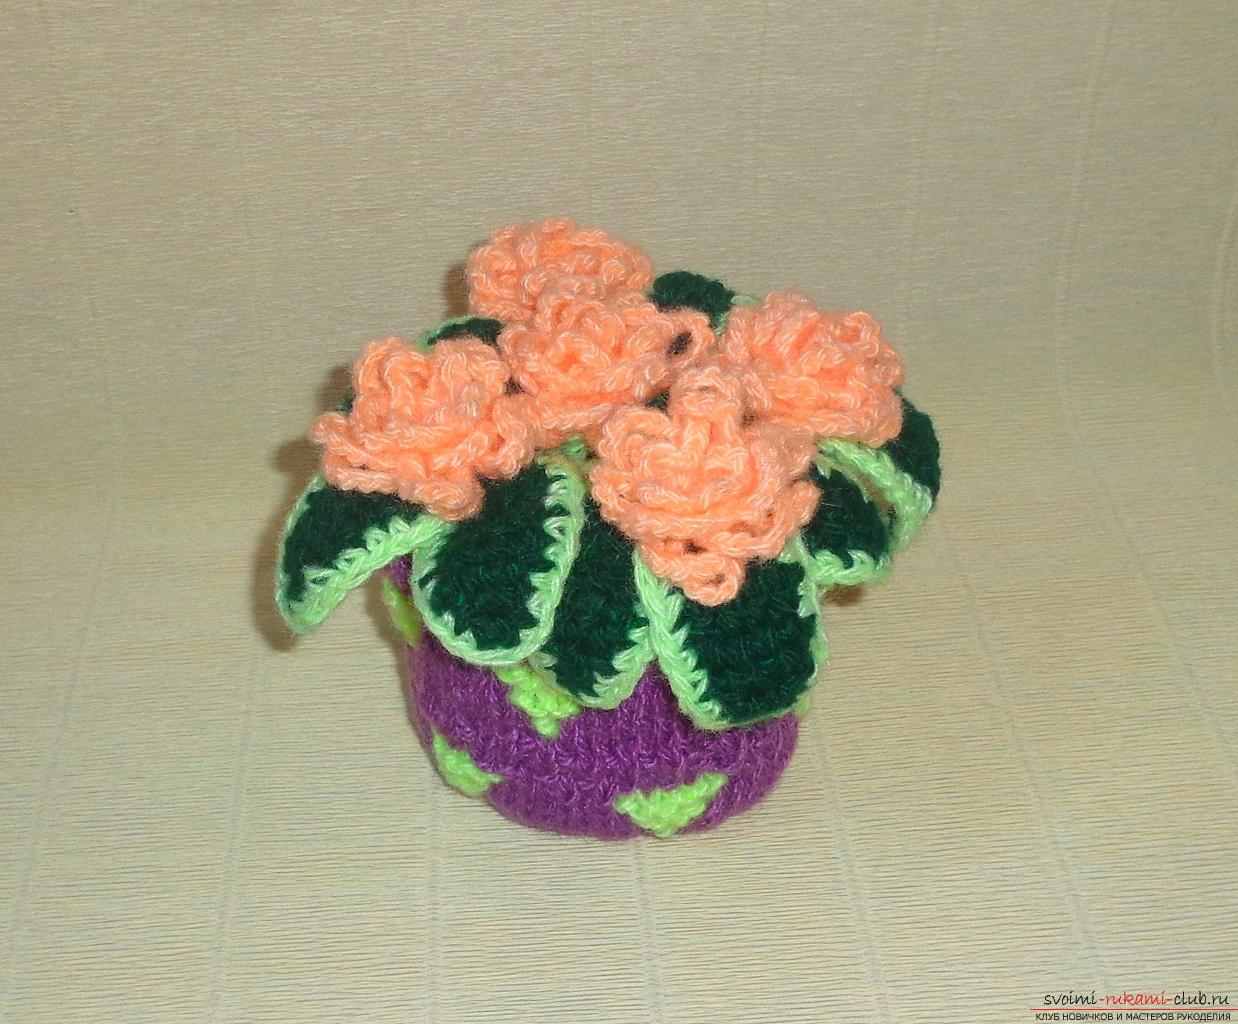 This master class of crochet crochet contains a rose scheme and a description of knitting .. Photo # 35